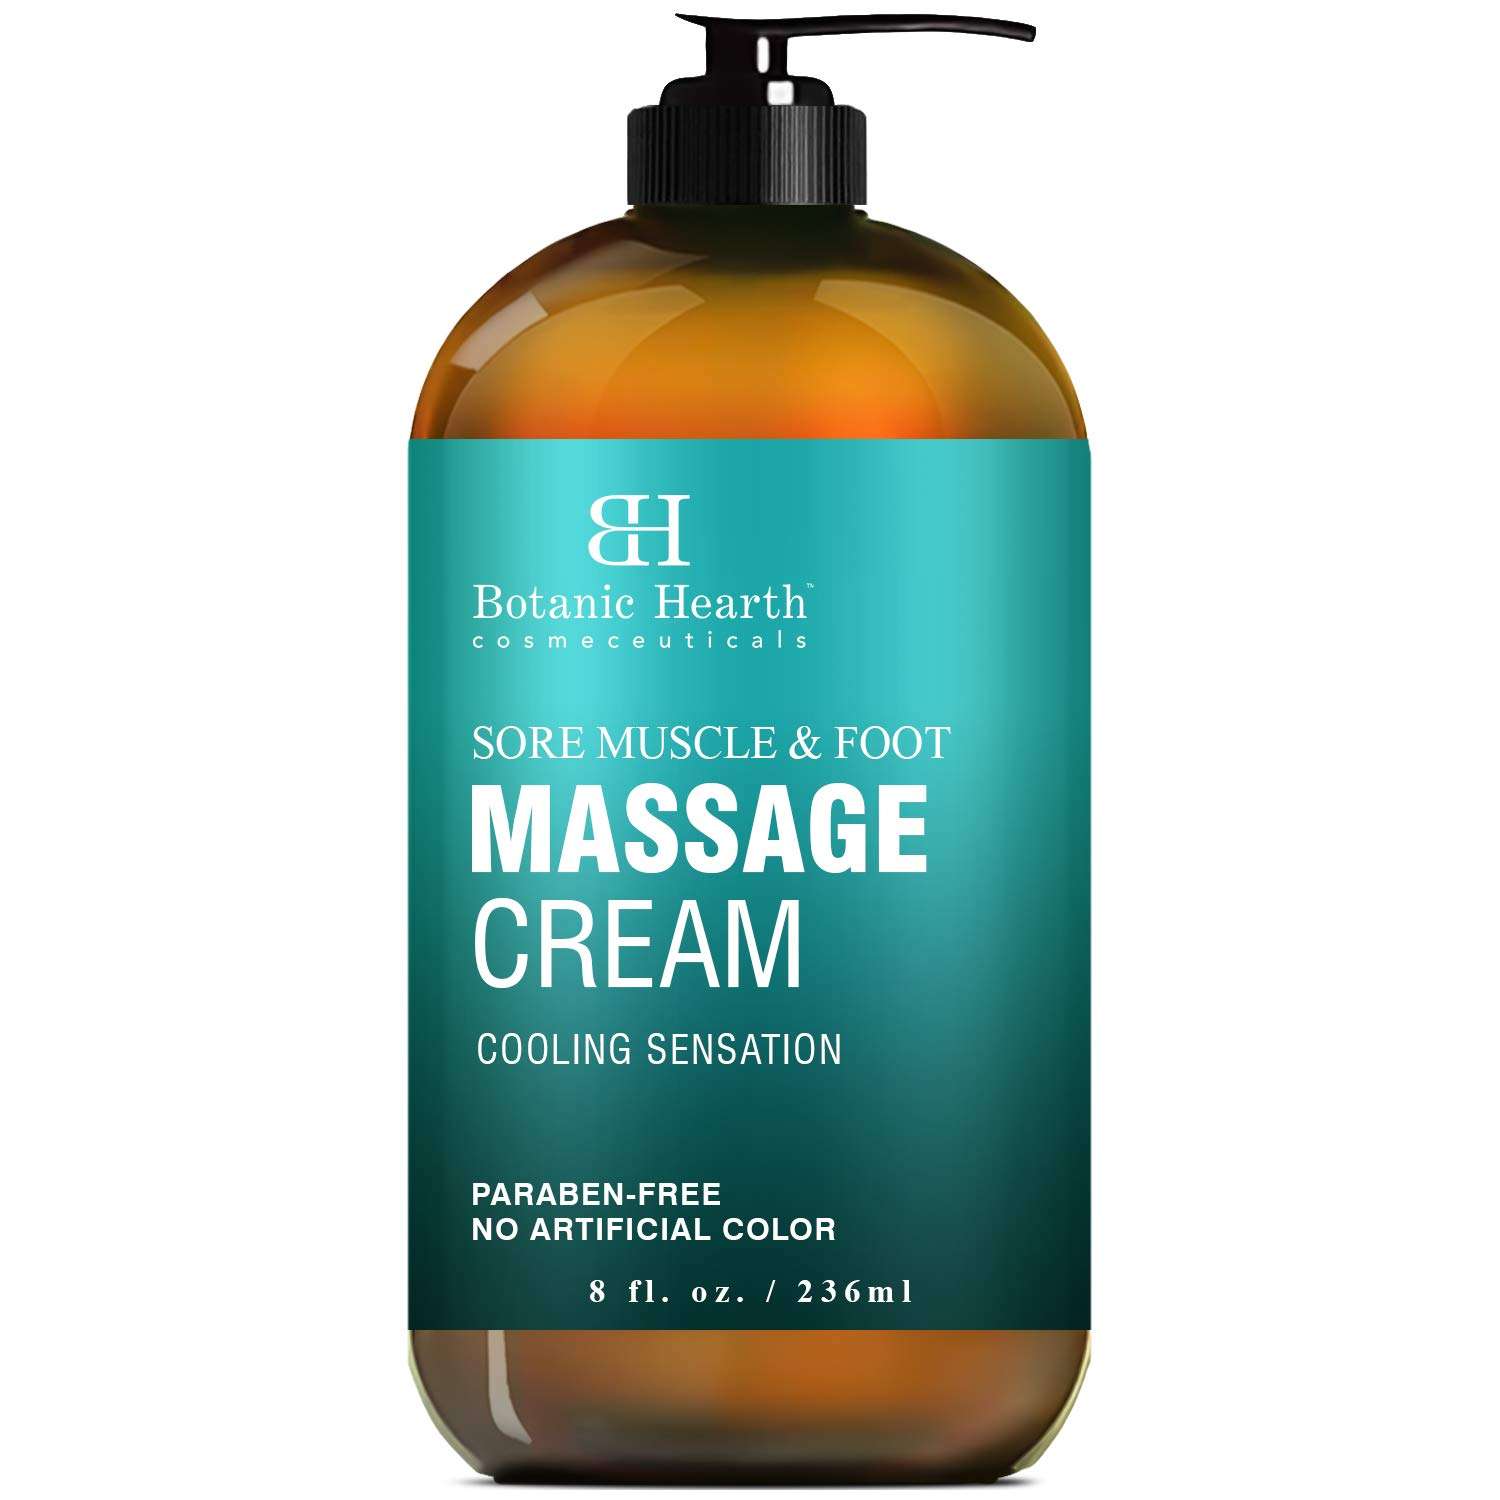 Sore Muscle and Foot Massage Cream